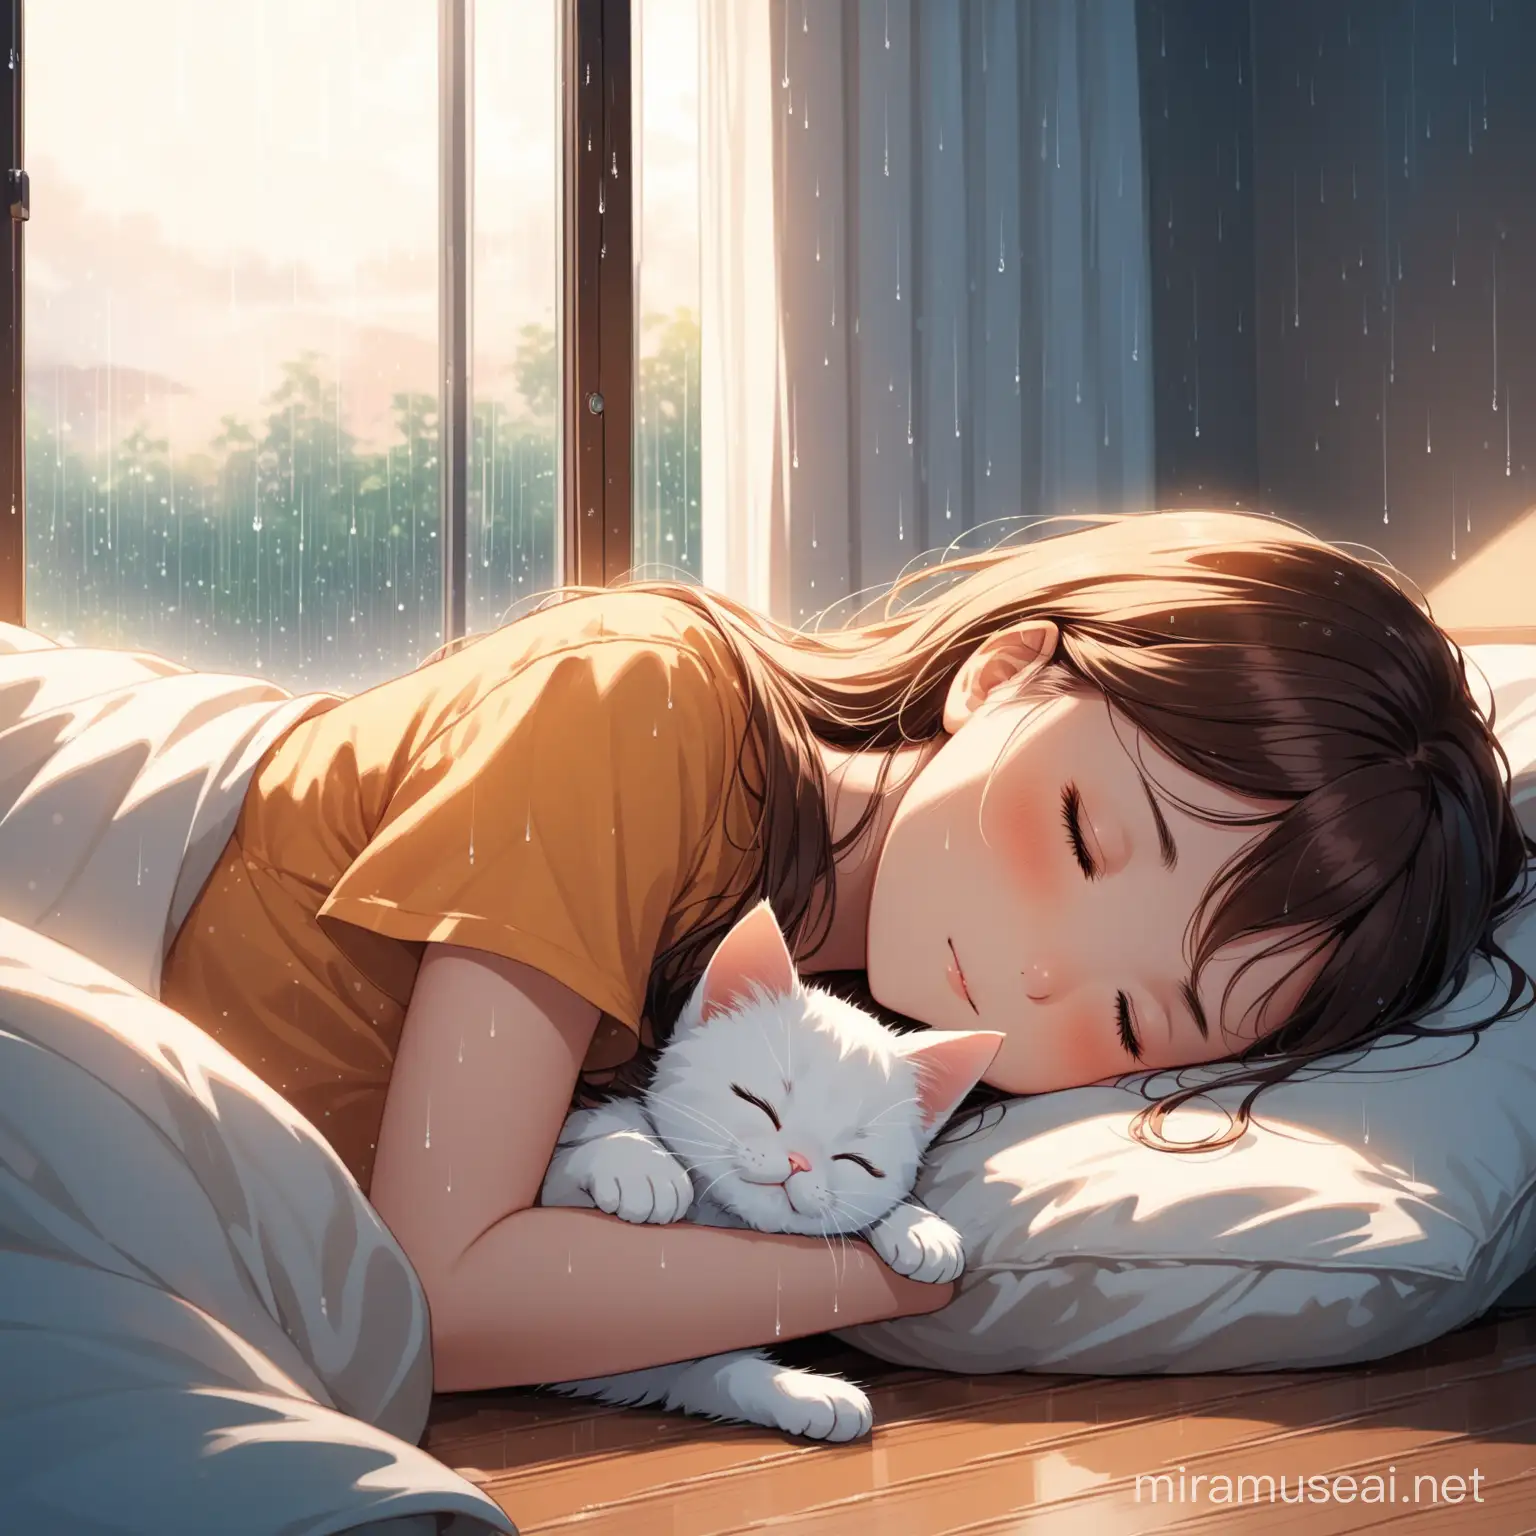 Aivisiom,Warm room, bed next to the window, rain falling on the window from outside, beautiful girl sleeping on the bed, beautiful reassuring light, A kitten sleeping on the floor